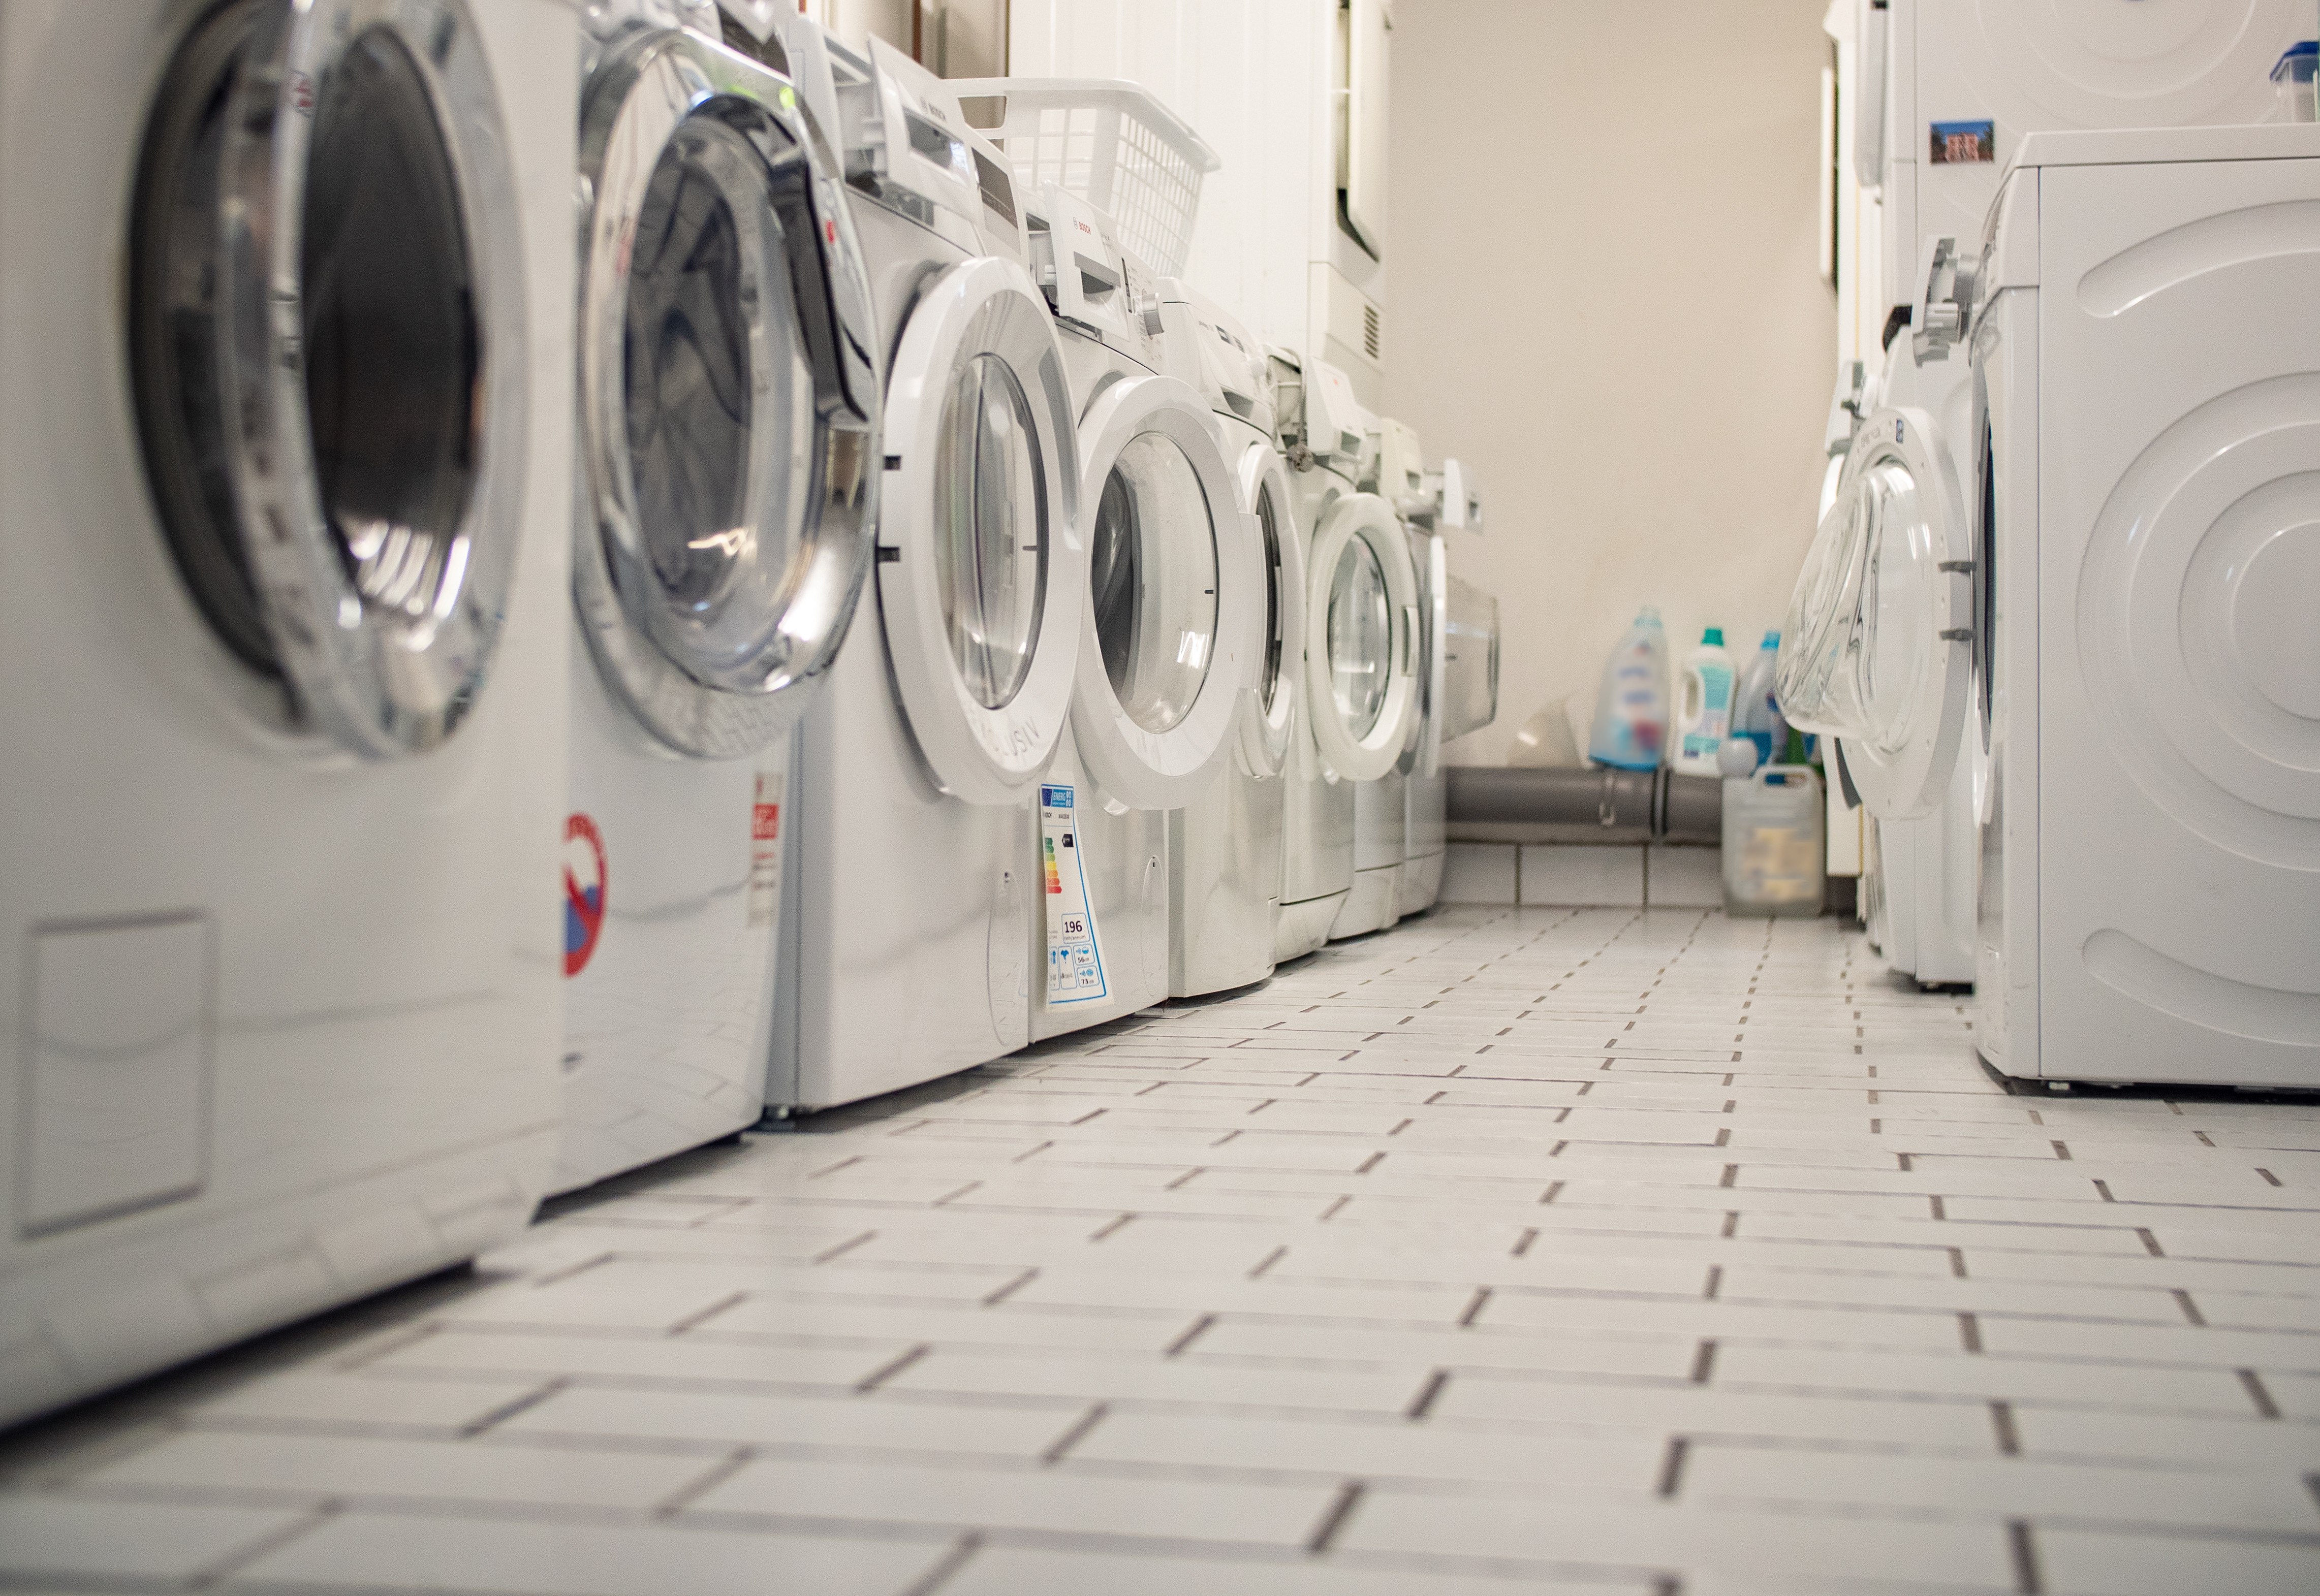 8 Small Laundry Room Ideas for Apartment, Condo and Co-op Dwellers